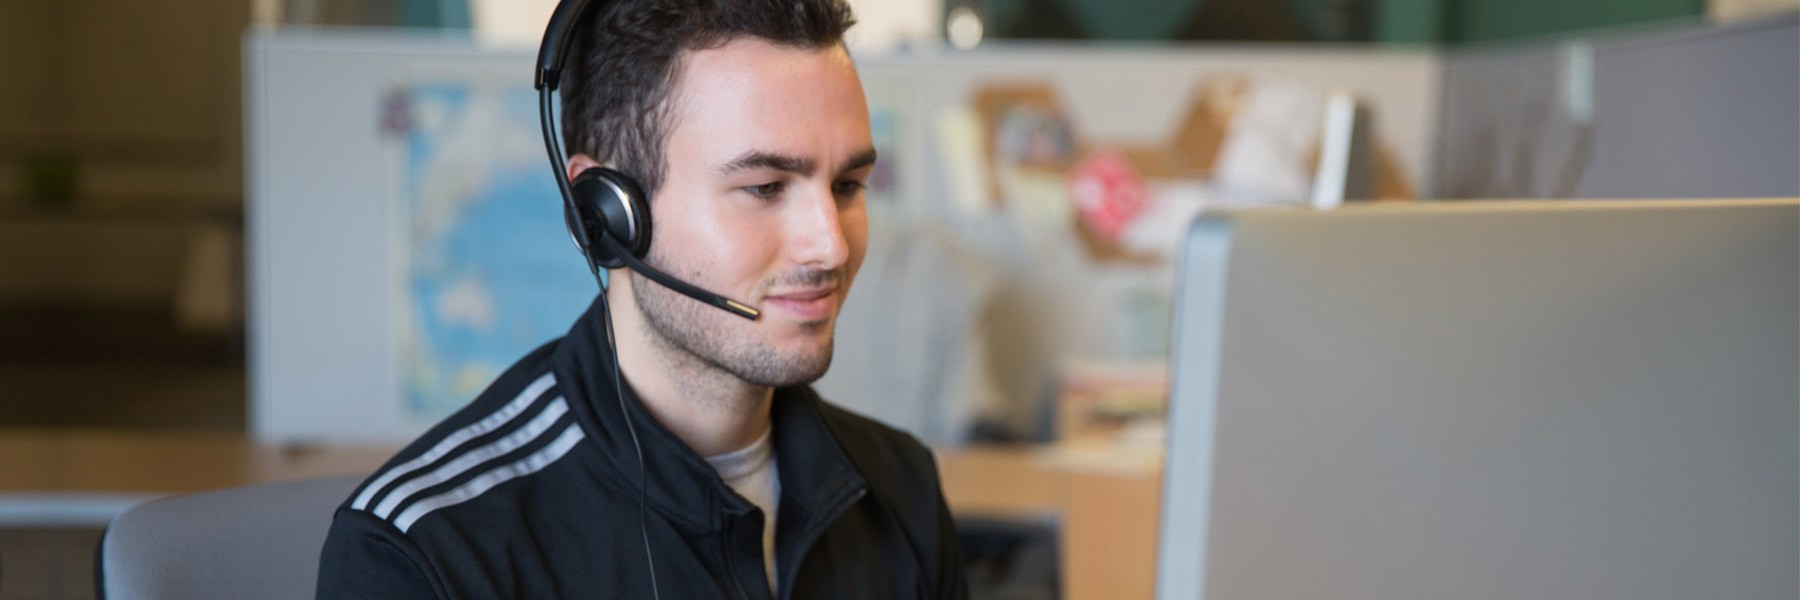 Call operator wearing a headset sitting in front of a computer